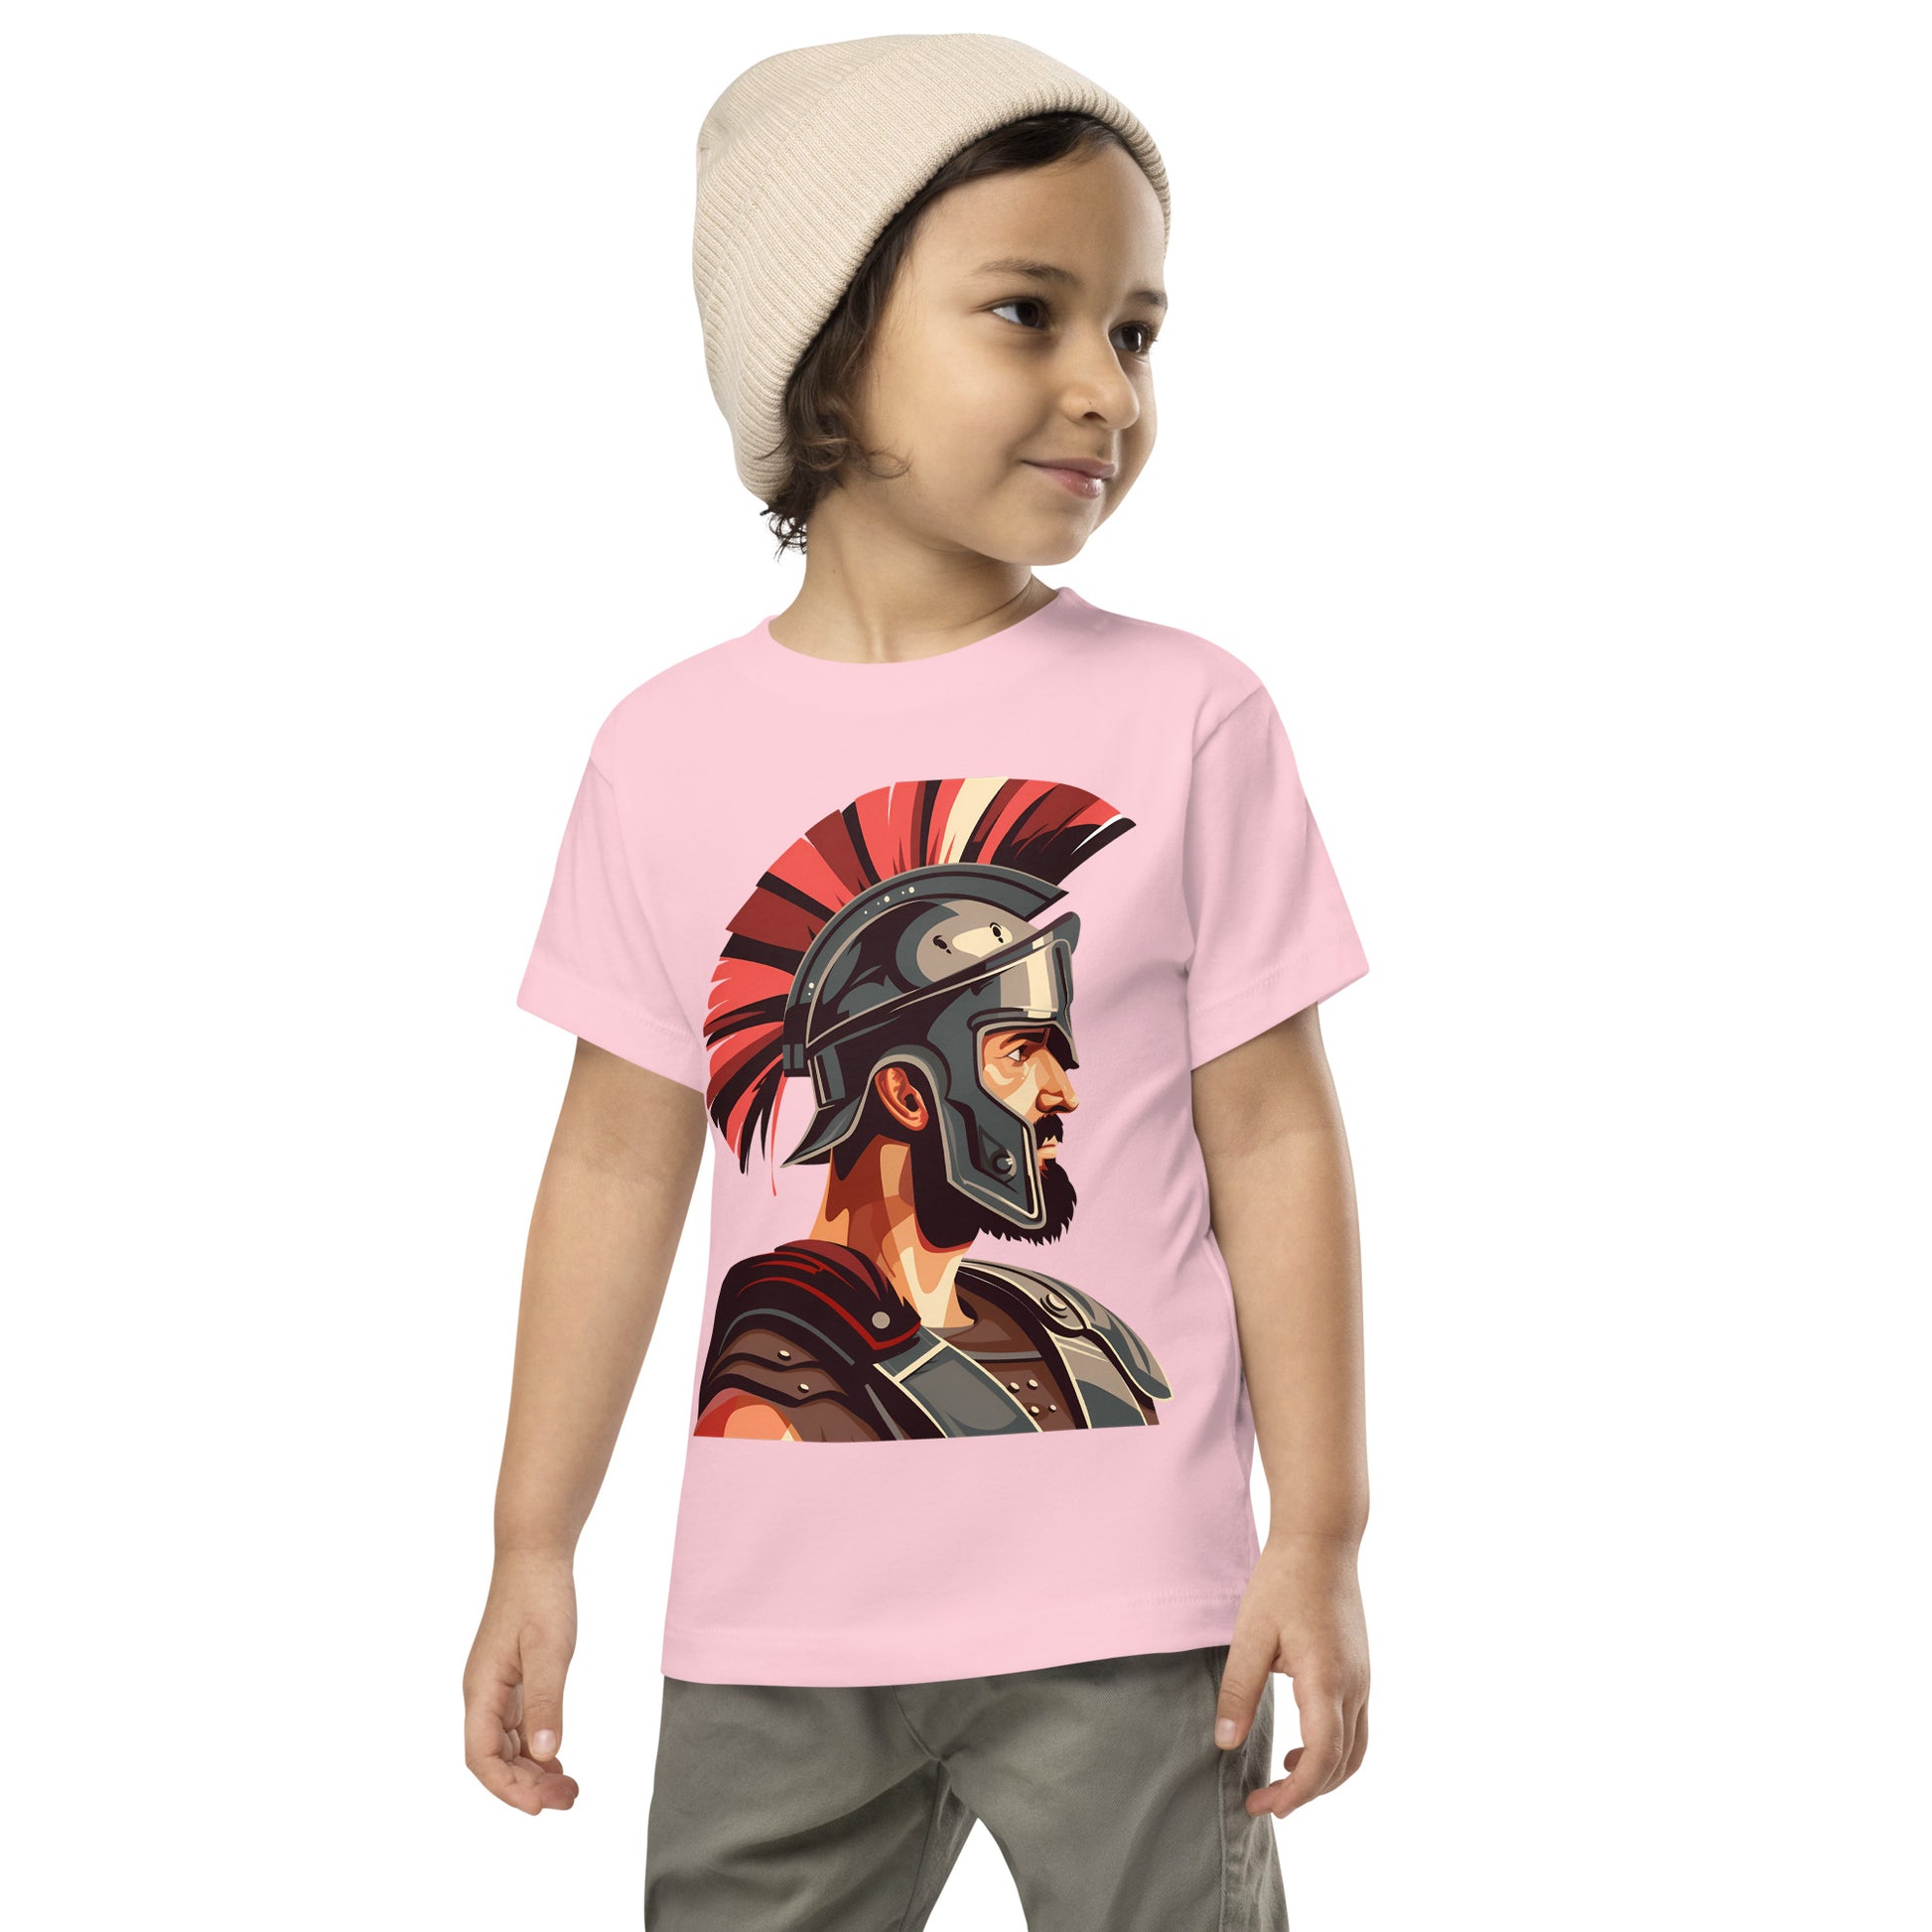 Toddler with a pink T-shirt with a print of a warrior